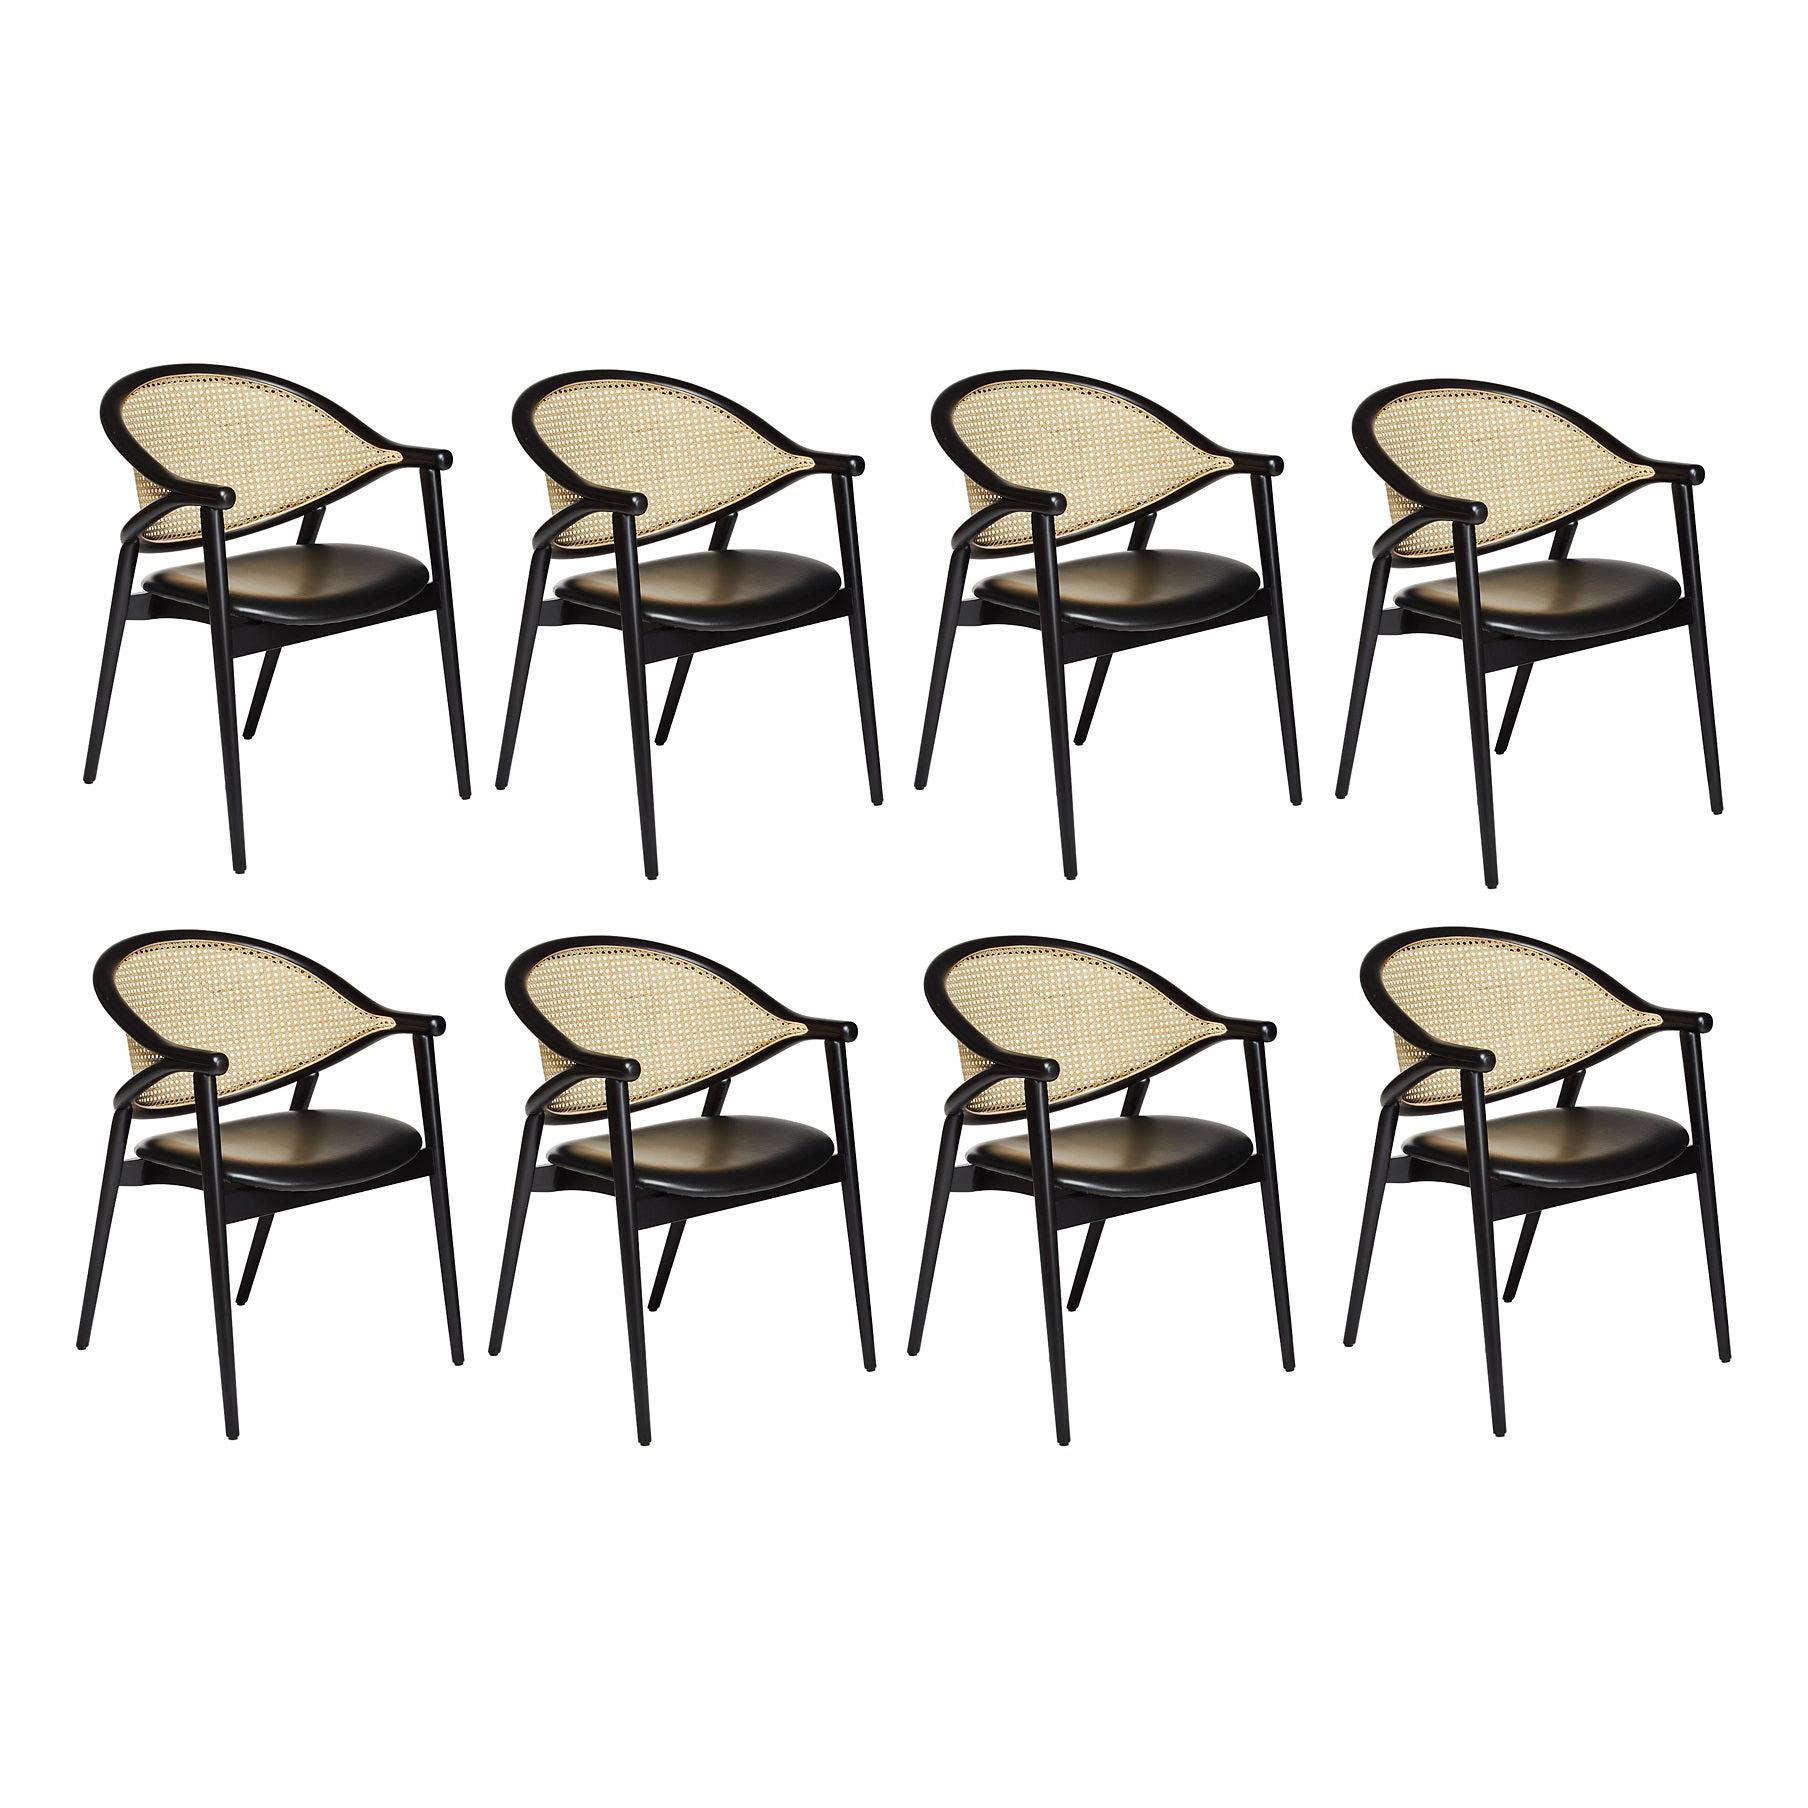 Bent Wood Dining Chair Featuring Woven Cane Backrest